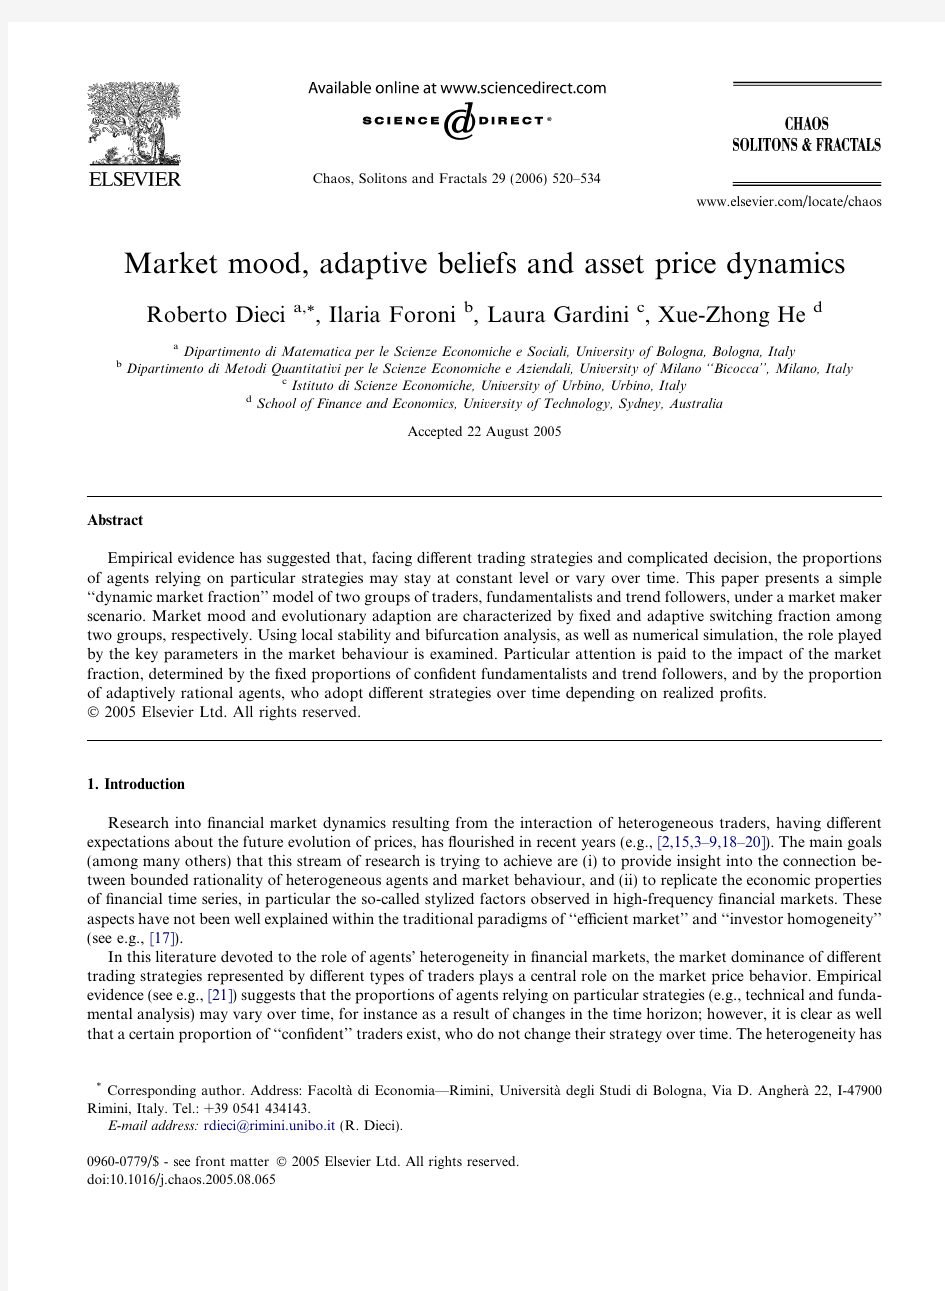 Market mood, adaptive beliefs and asset price dynamics